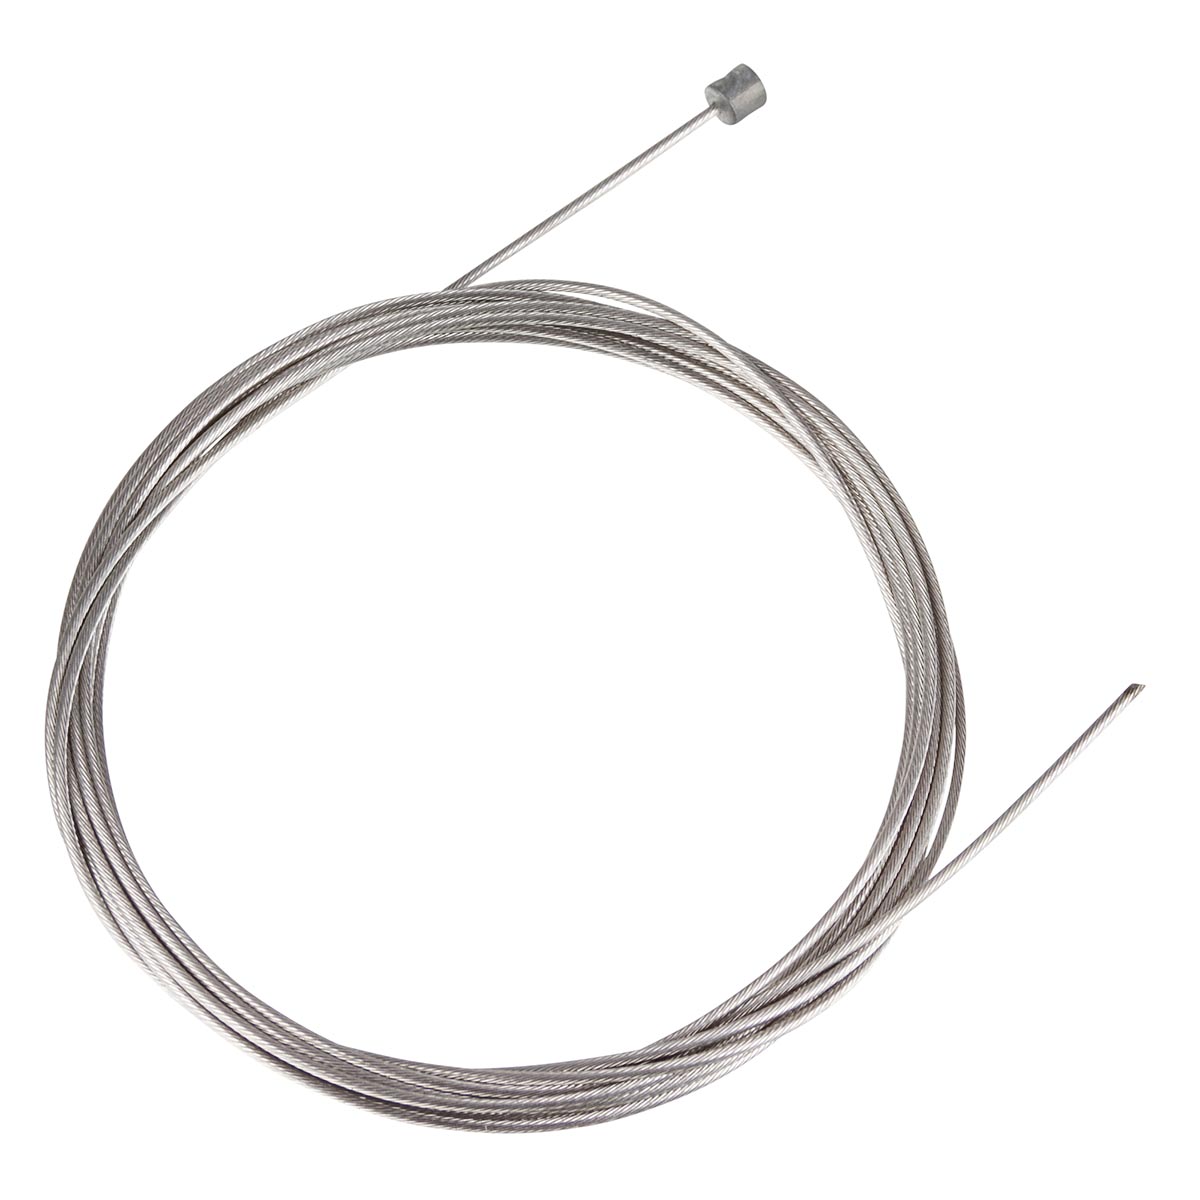 shimano shift inner cable